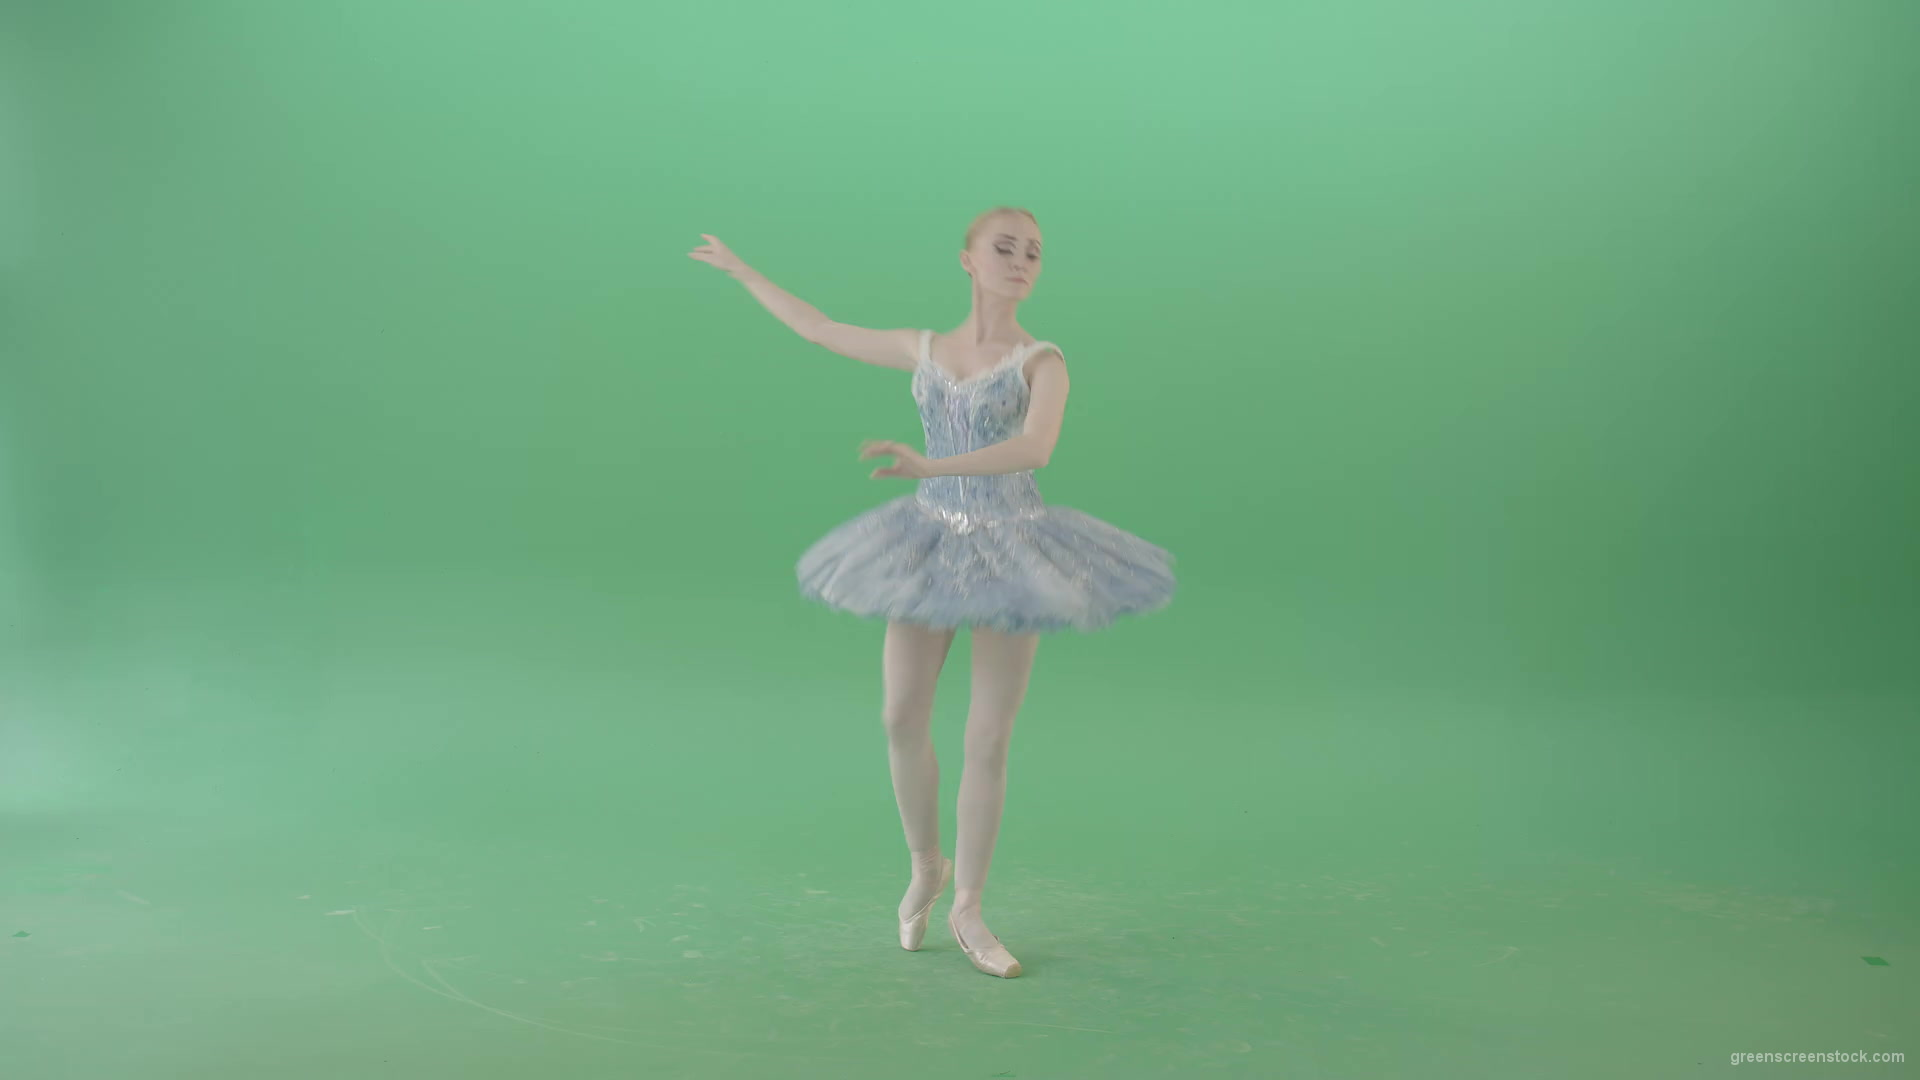 Christmas-story-baller-dancing-girl-in-blue-ballerin-dress-performing-isolated-on-green-screen-4K-Video-Footage-1920_008 Green Screen Stock